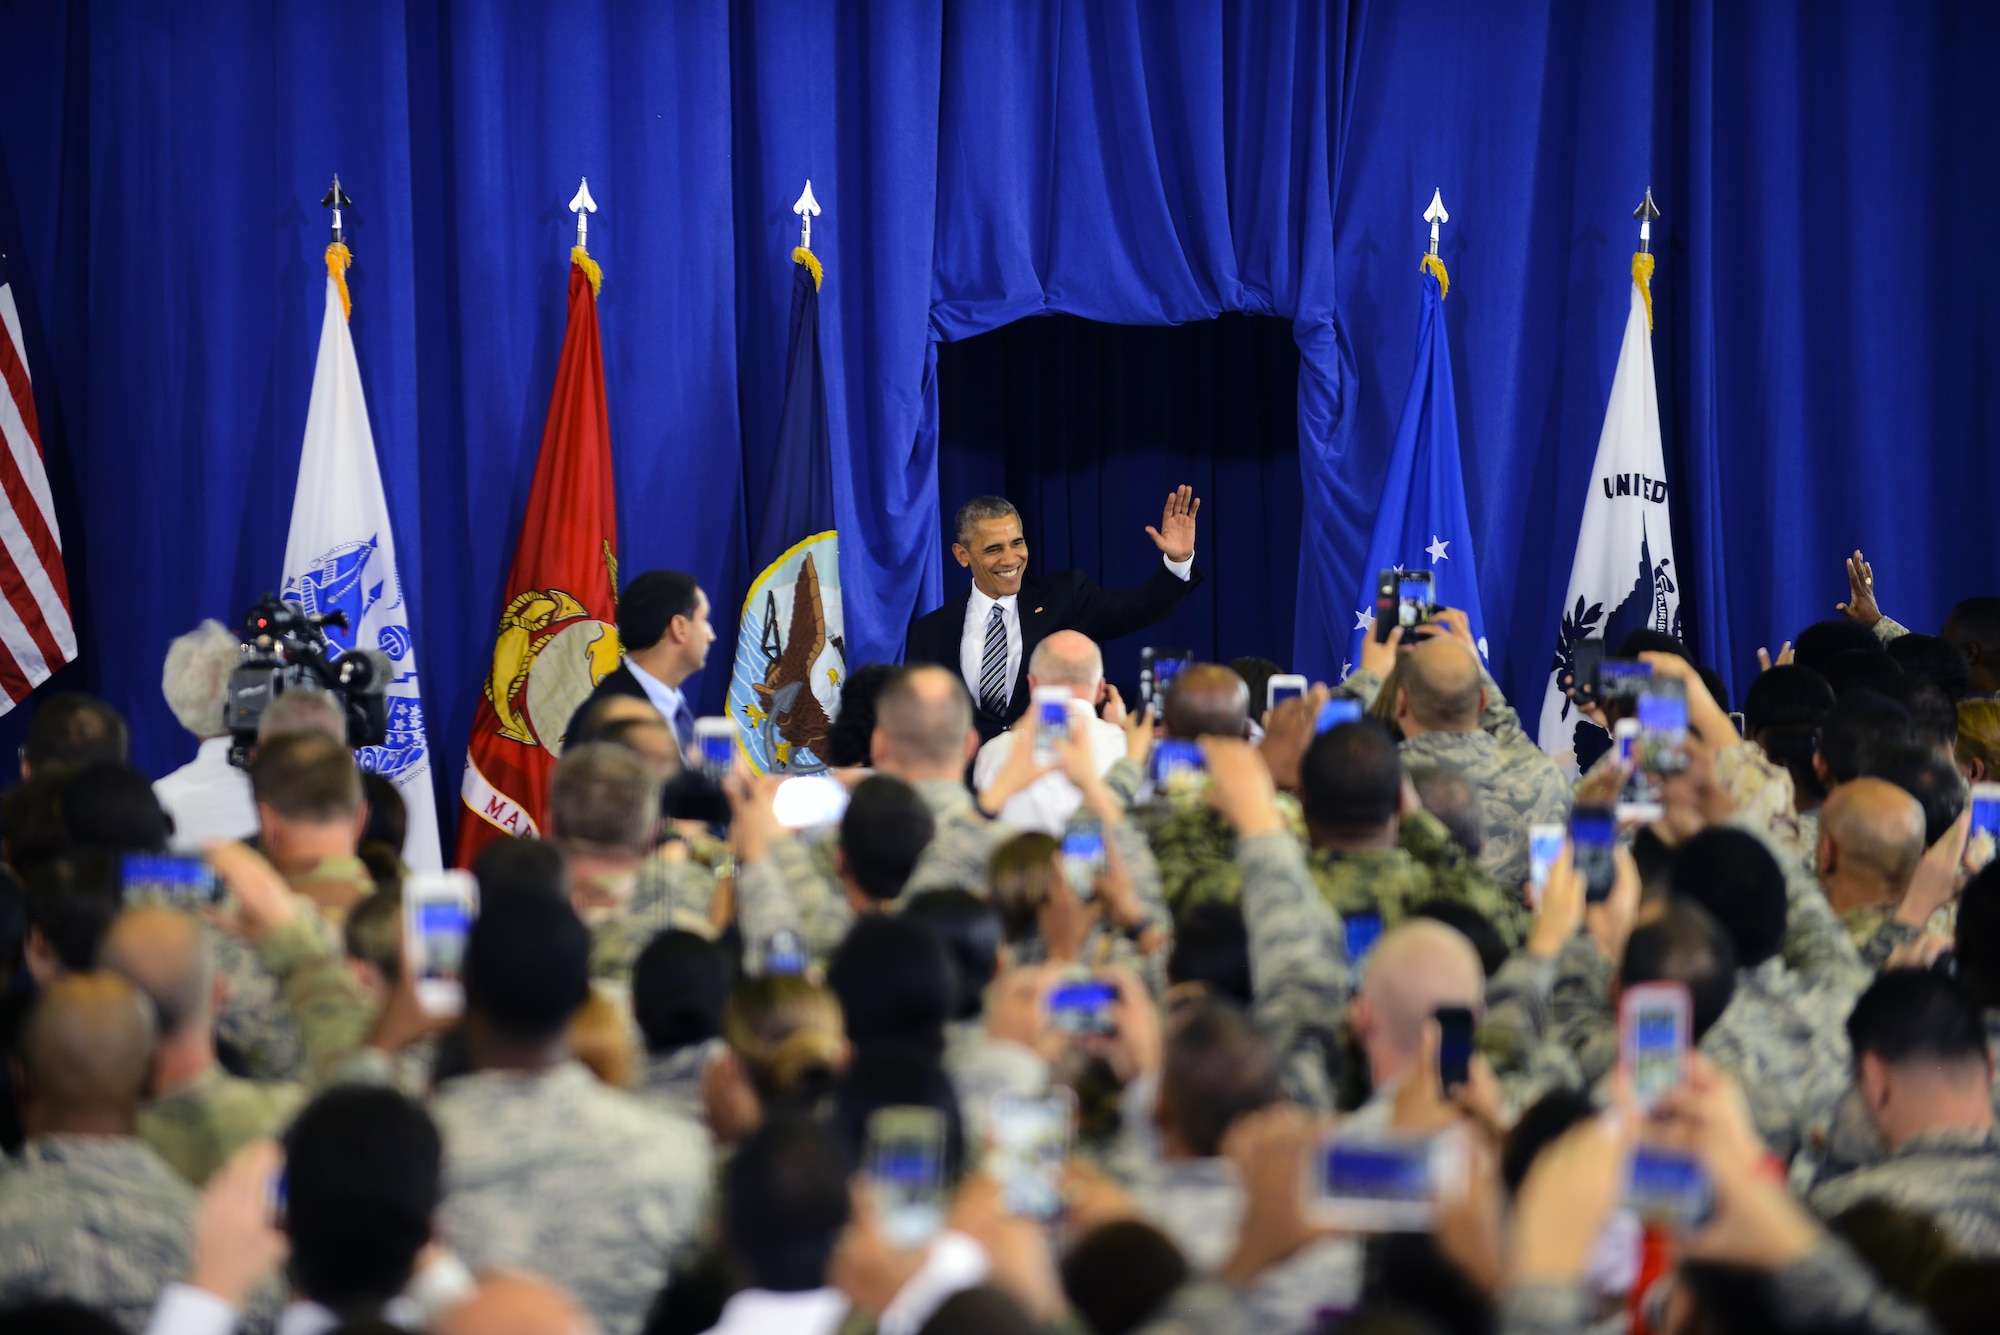 President Barack Obama greets Team MacDill as he makes his entrance prior to speaking at MacDill Air Force Base, Fla. Dec. 6, 2016. More than 2,500 personnel gathered in Hangar 1 to listen to the president’s final speech on national security. (U.S. Air Force photo by Staff Sgt. Melanie Hutto)